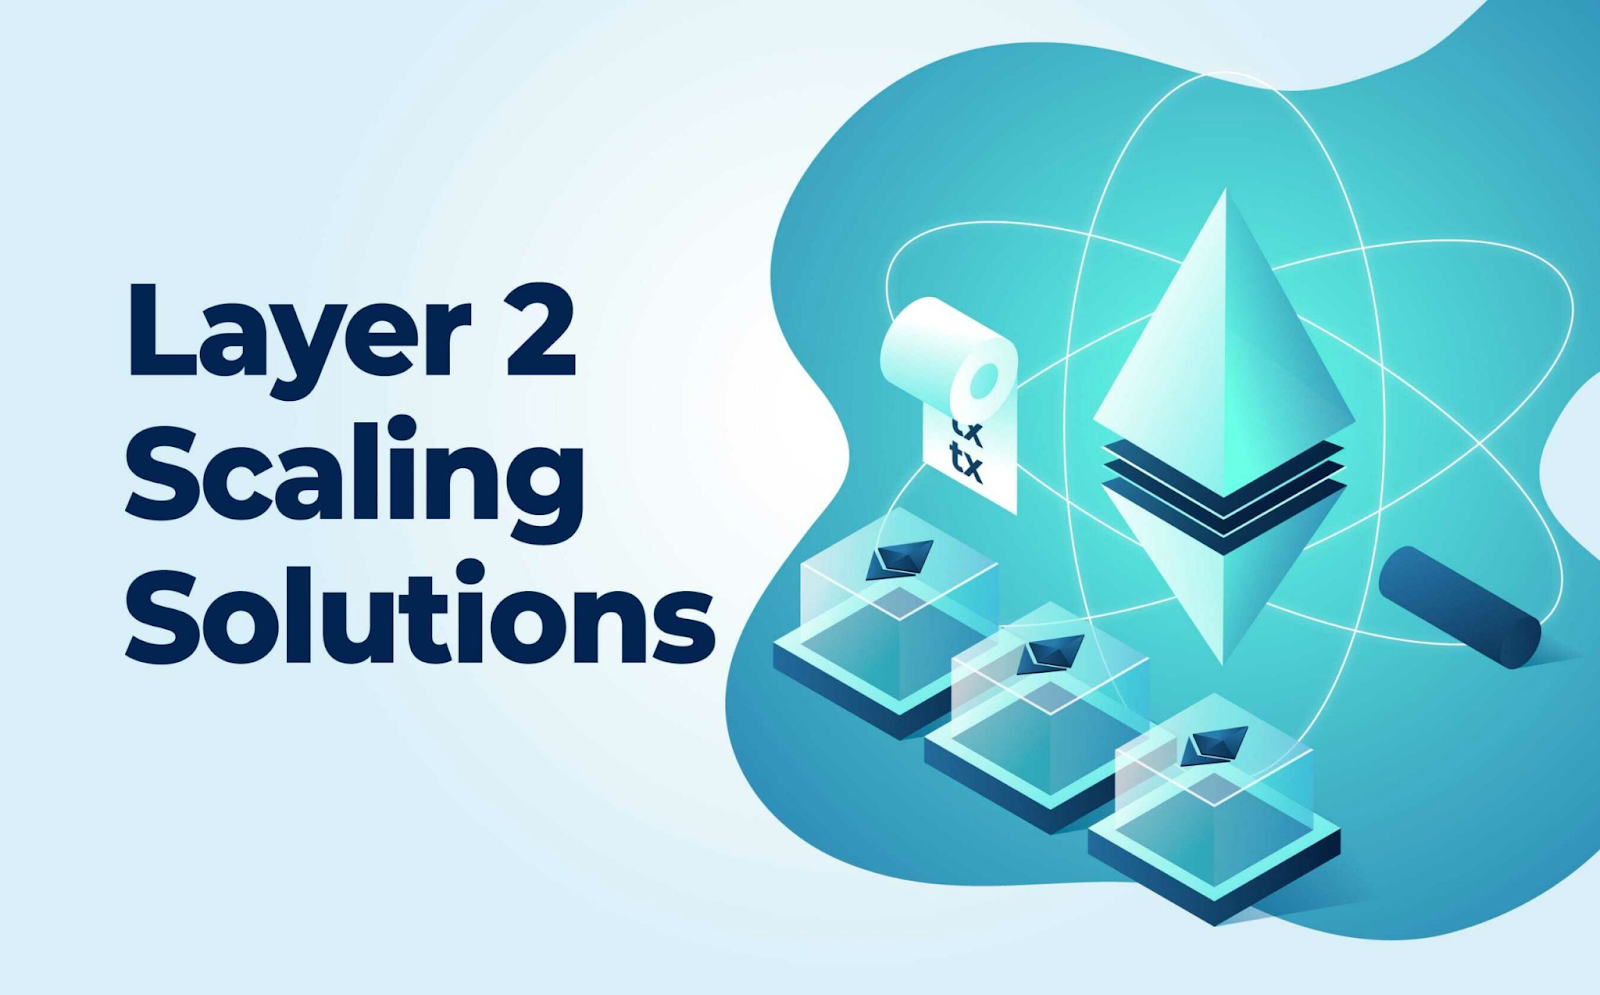 Scaling solutions to consider when addressing layer 2 vs layer 3.